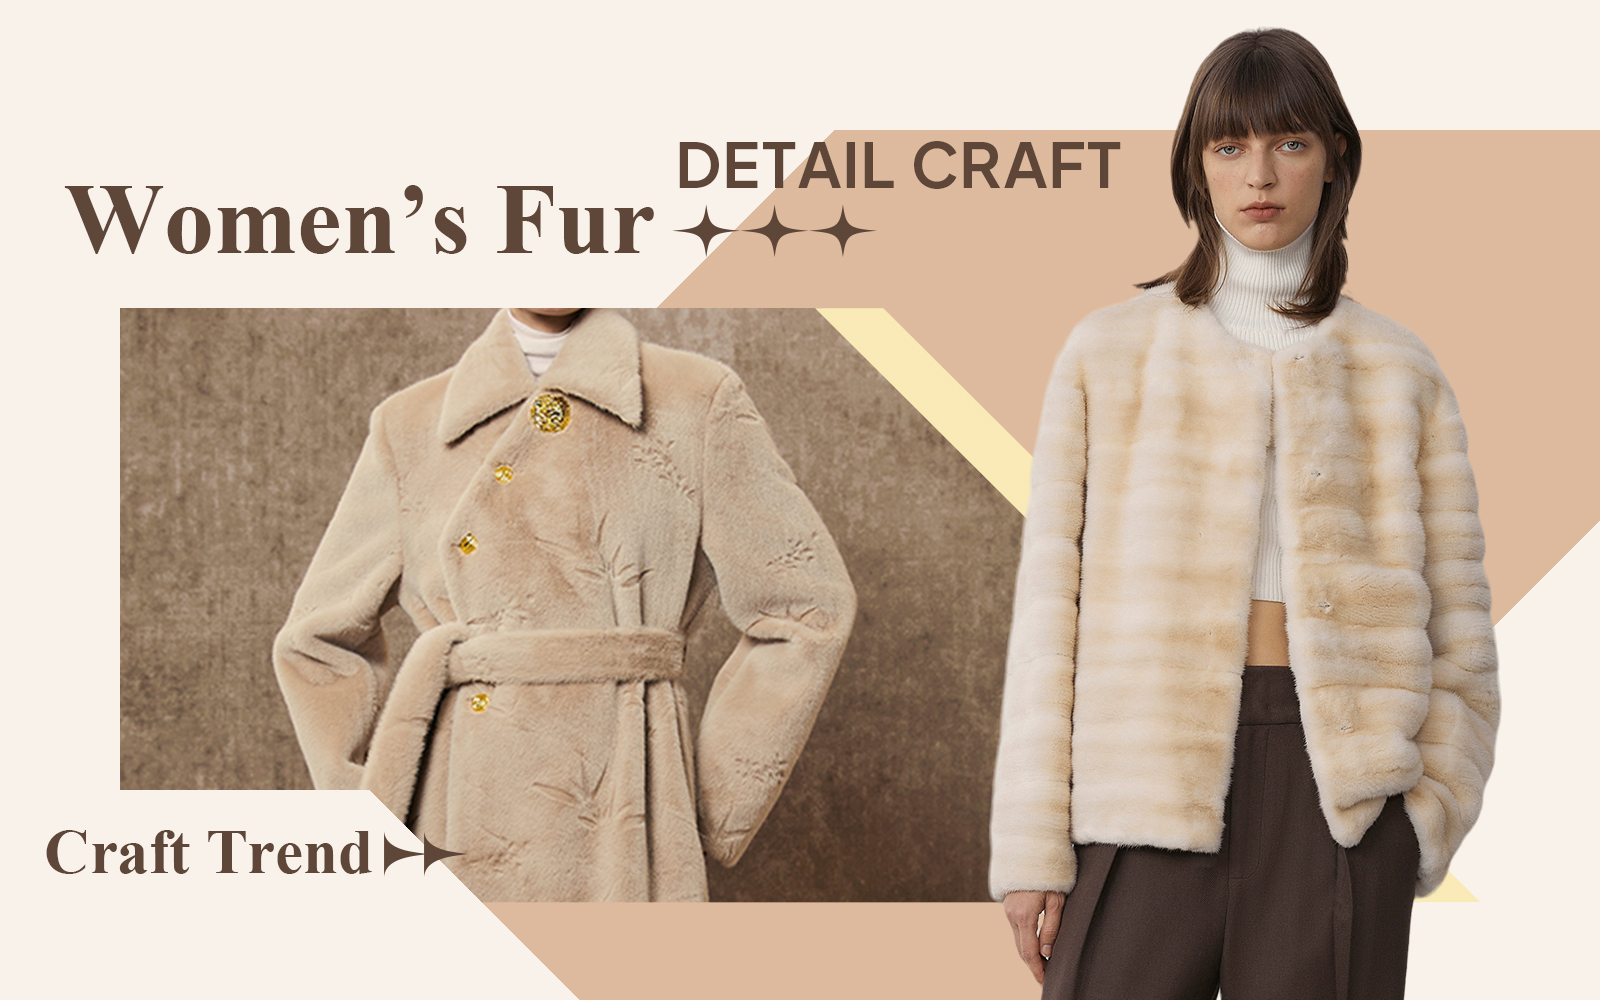 Luxury Craft -- The Detail & Craft Trend for Women's Fur